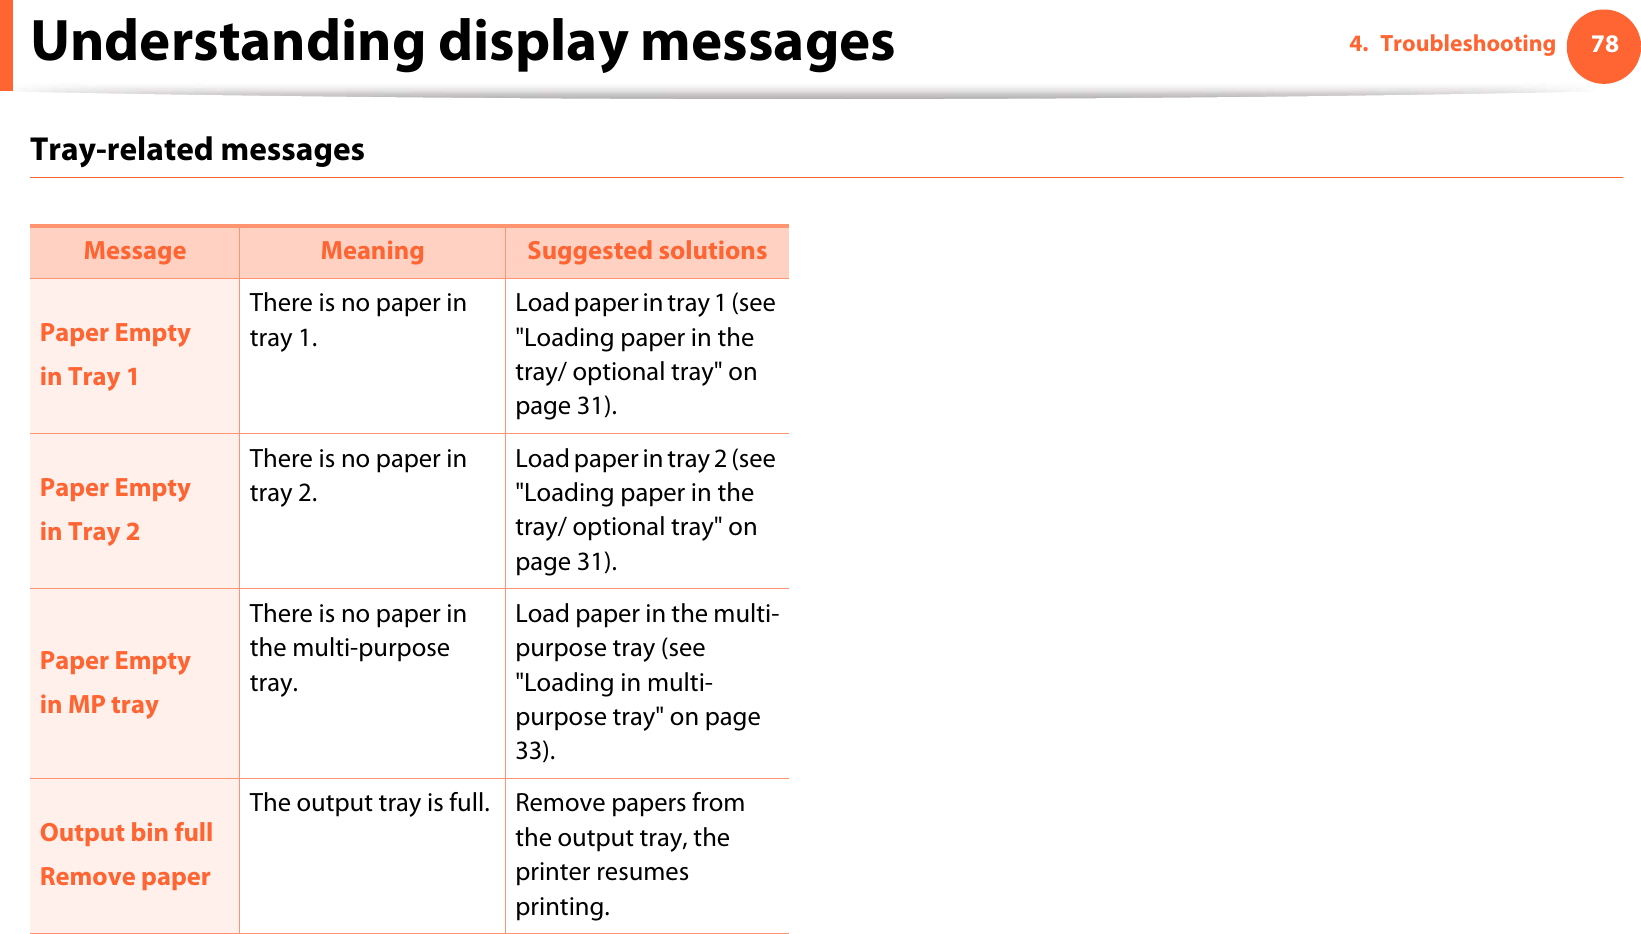 Understanding display messages 784. TroubleshootingTray-related messagesMessage Meaning Suggested solutionsPaper Emptyin Tray 1There is no paper in tray 1. Load paper in tray 1 (see &quot;Loading paper in the tray/ optional tray&quot; on page 31).Paper Emptyin Tray 2There is no paper in tray 2. Load paper in tray 2 (see &quot;Loading paper in the tray/ optional tray&quot; on page 31).Paper Emptyin MP trayThere is no paper in the multi-purpose tray. Load paper in the multi-purpose tray (see &quot;Loading in multi-purpose tray&quot; on page 33).Output bin fullRemove paperThe output tray is full.  Remove papers from the output tray, the printer resumes printing. 